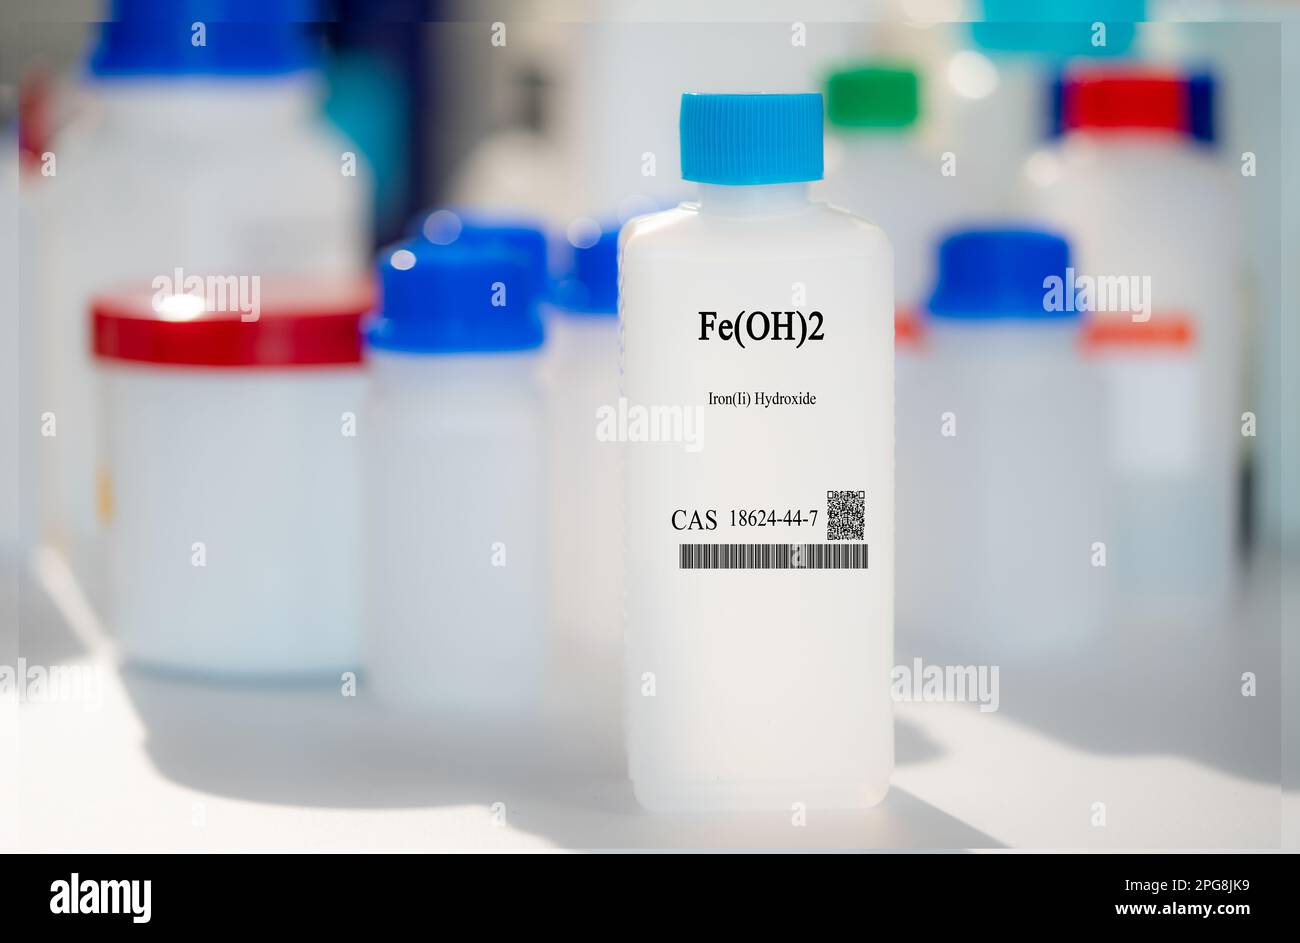 Fe(OH)2 iron(II) hydroxide CAS 18624-44-7 chemical substance in white plastic laboratory packaging Stock Photo